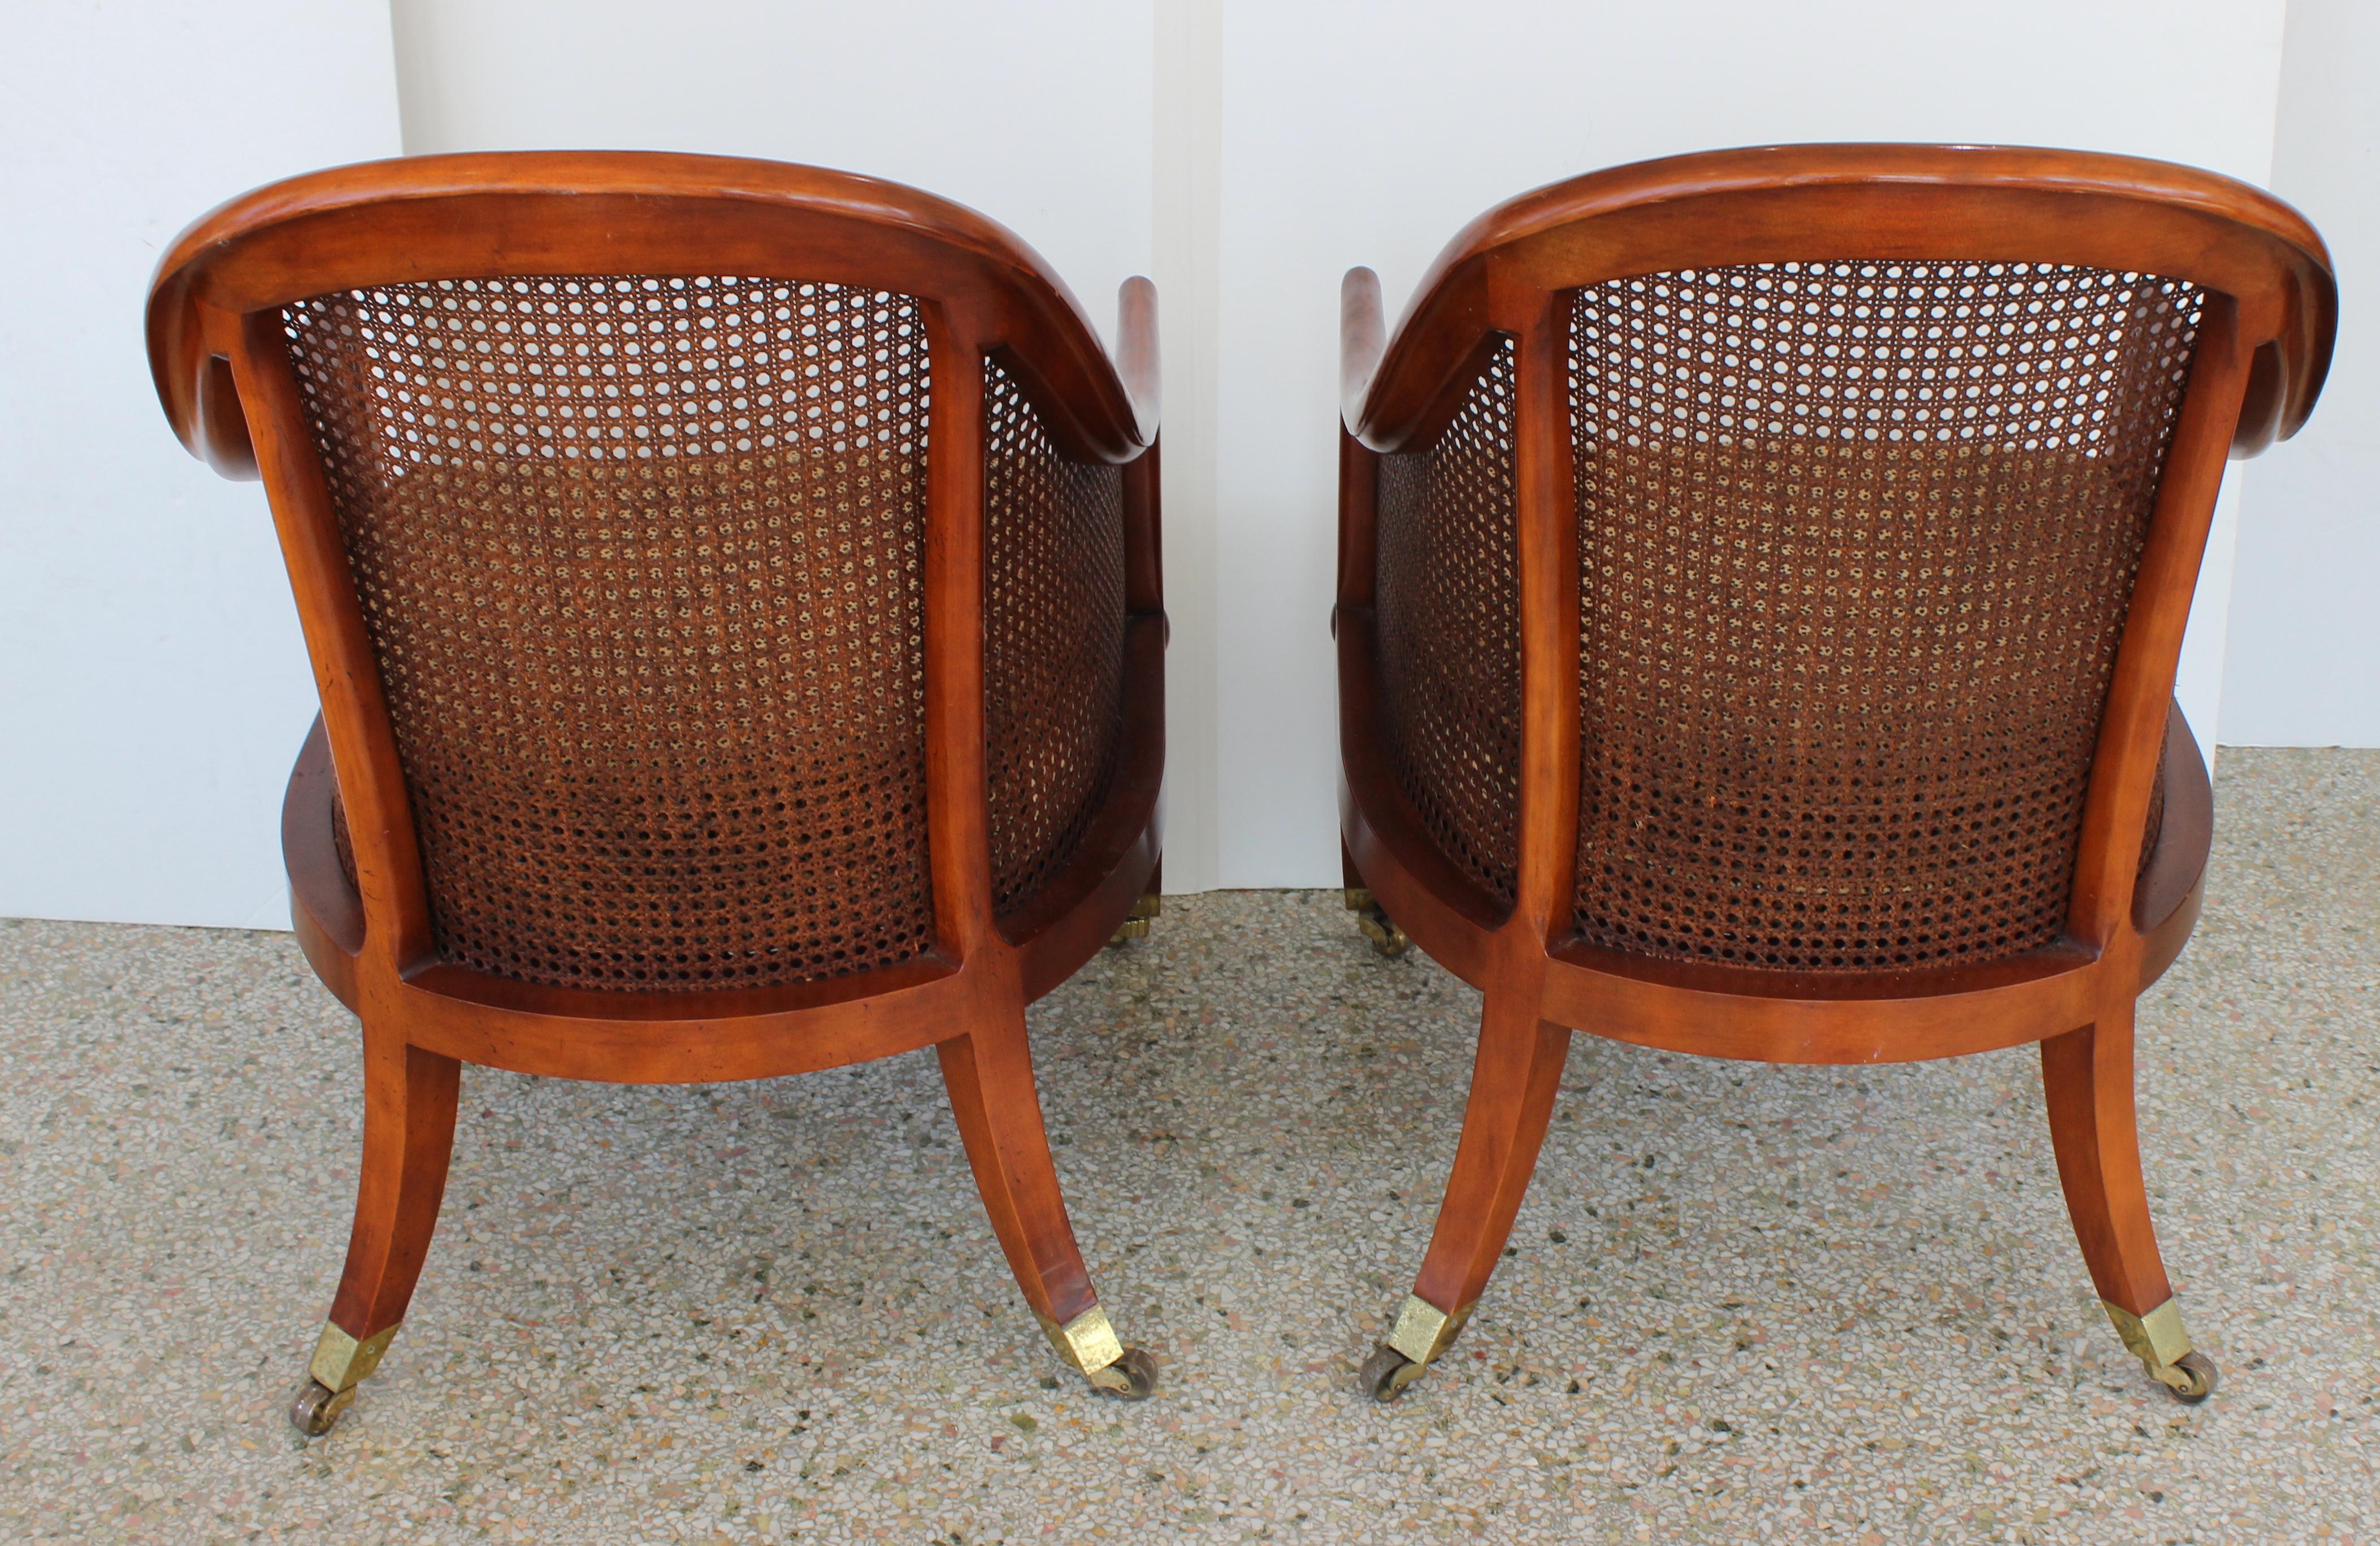 Hand-Crafted Pair of English Regency Style Chairs by Baker Furniture